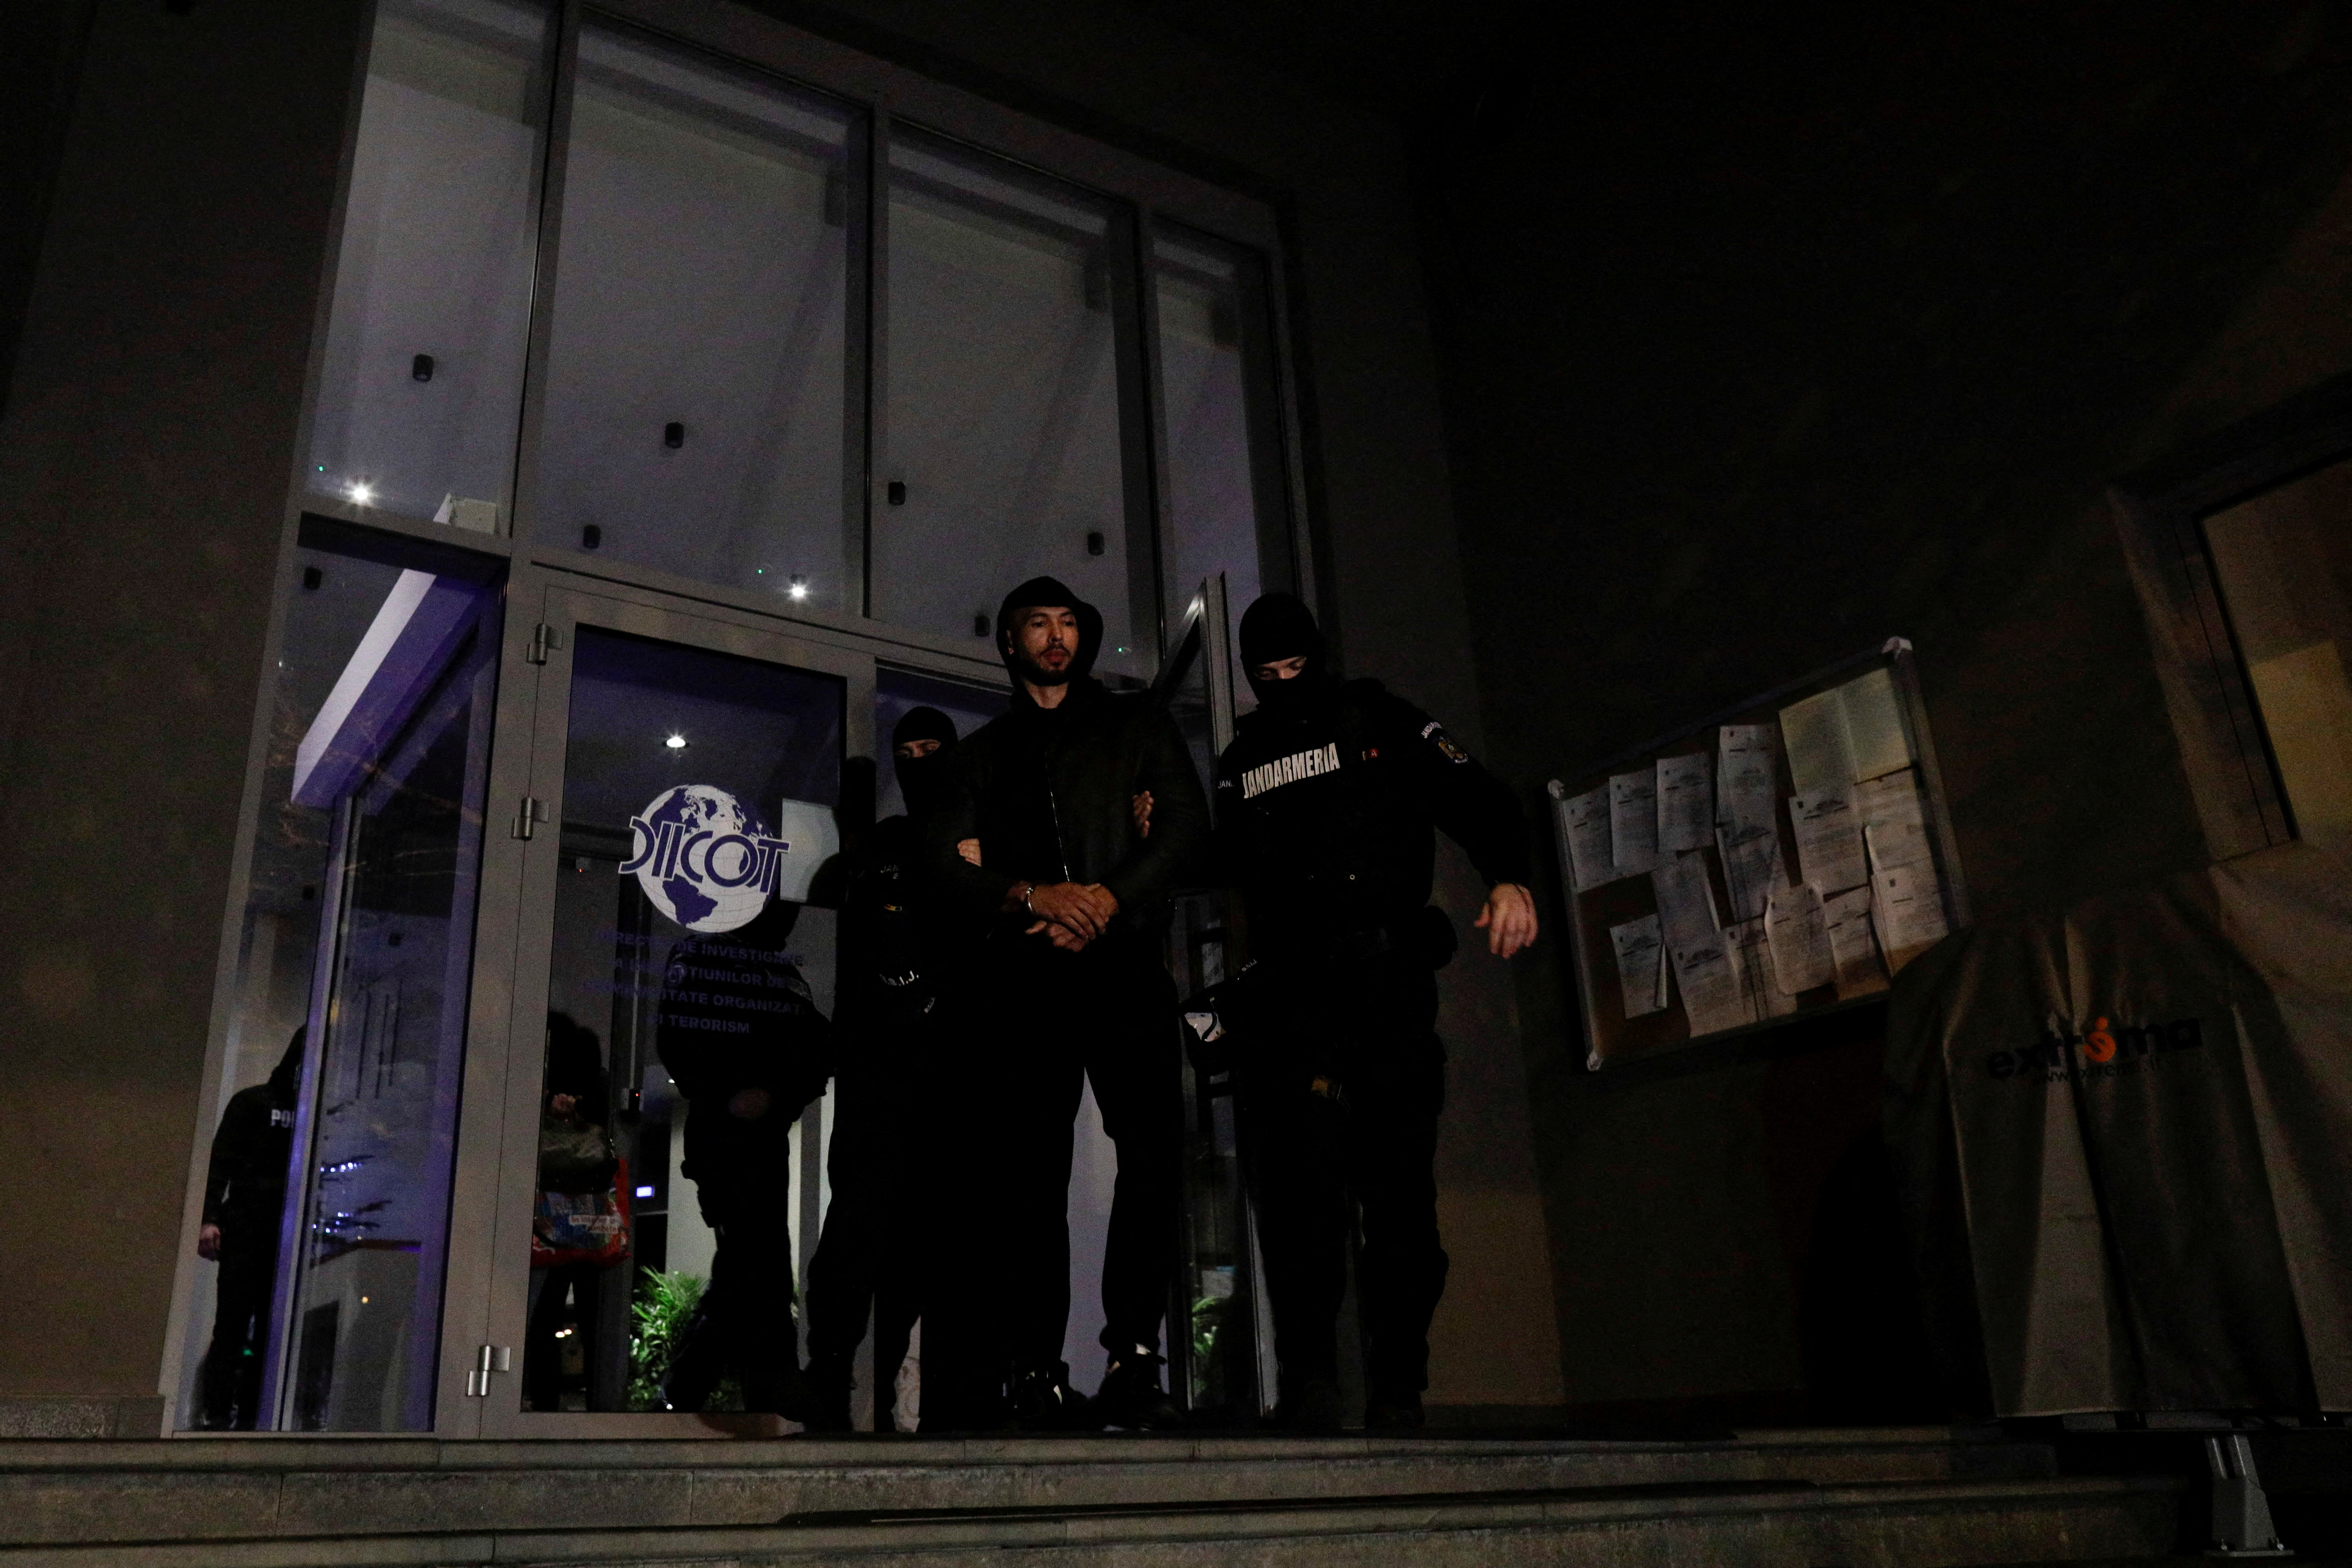 Andrew Tate and Tristan Tate are escorted by police officers out of the Bucharest Directorate for Investigation of Organized Crime and Terrorism (DIICOT) headquarters after being detained, in Bucharest, Romania December 29, 2022. Inquam Photos/Octav Ganea via REUTERS/File